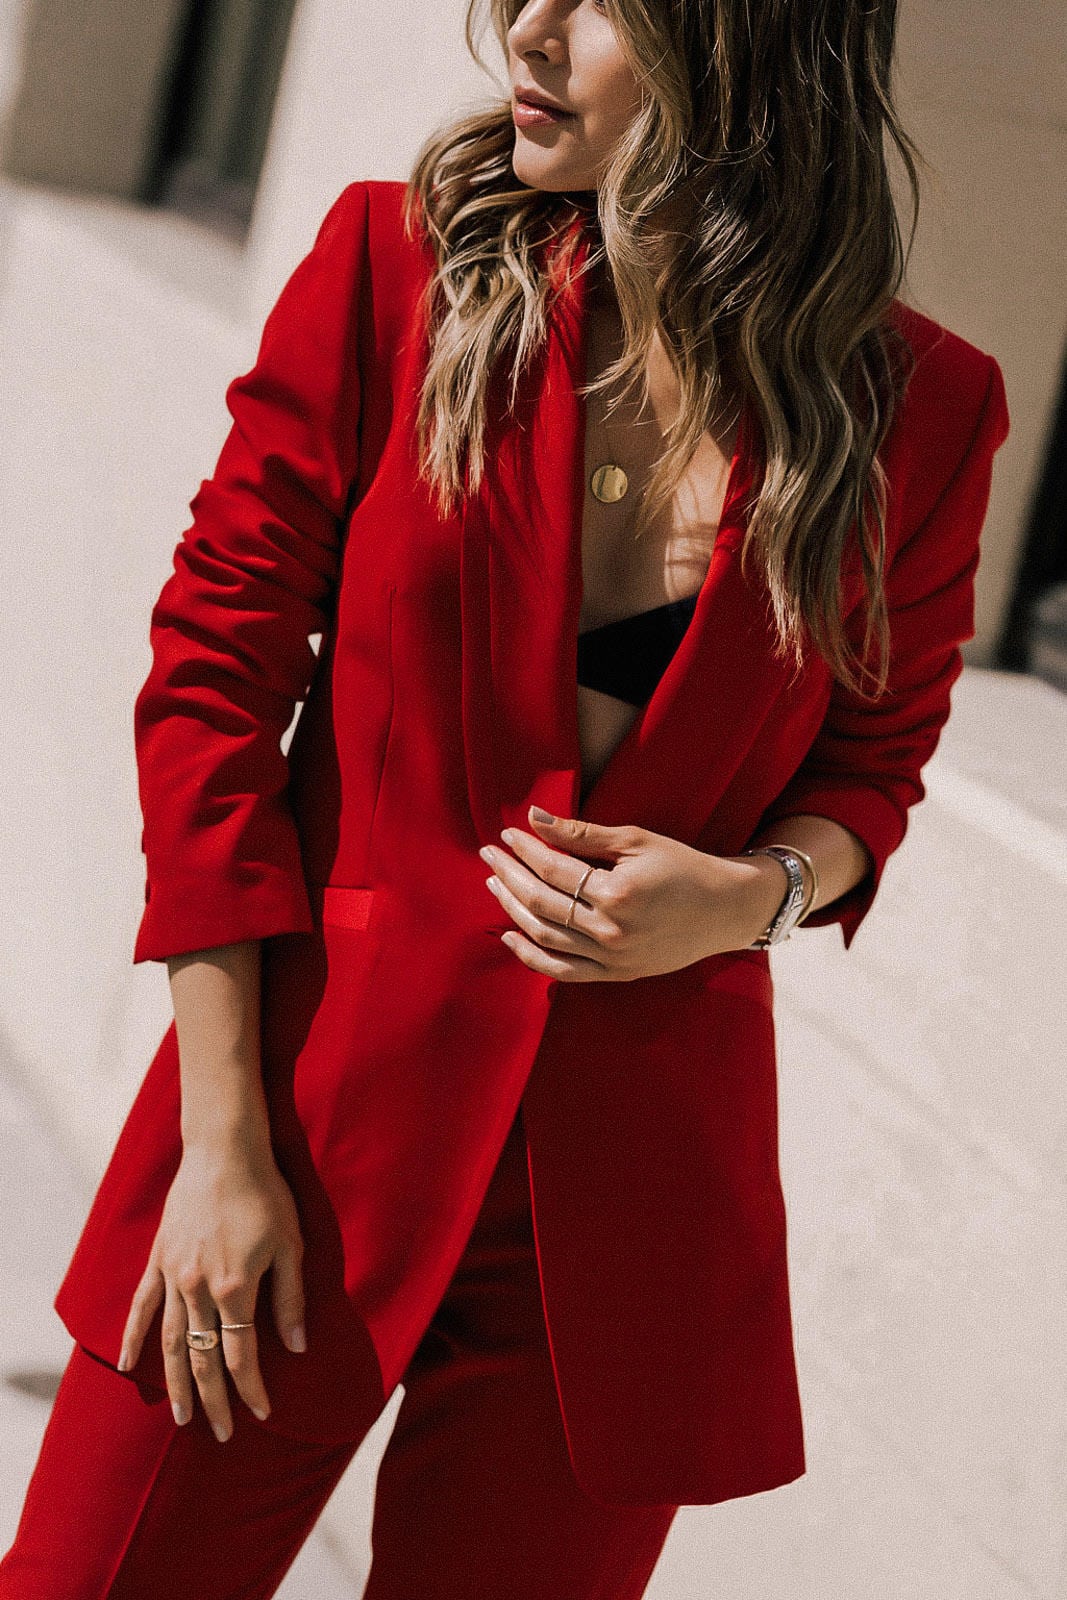 Pam Hetlinger Outfits, Red Power Suit, Trouser Suit Trend, Street Style | TheGirlFromPanama.com